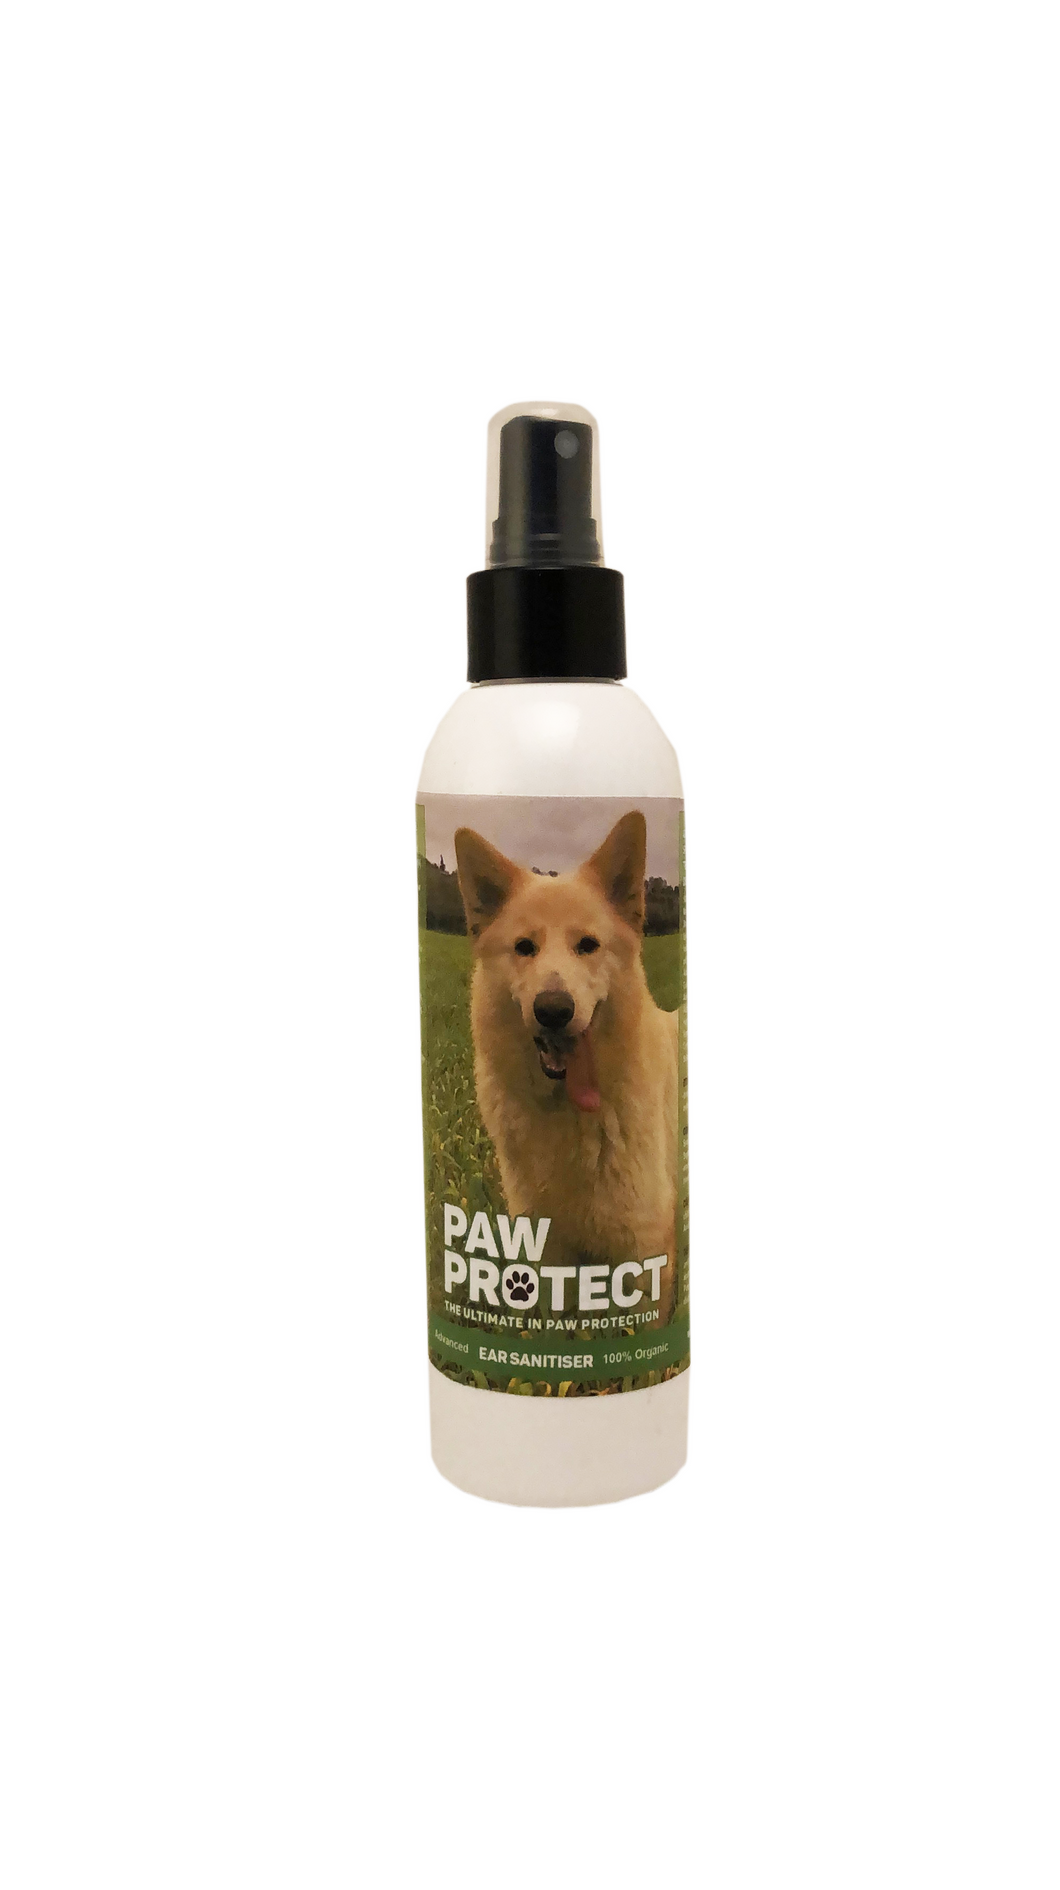 Paw Protect – Organic Dog Ear Sanitiser and Cleaner 200ml